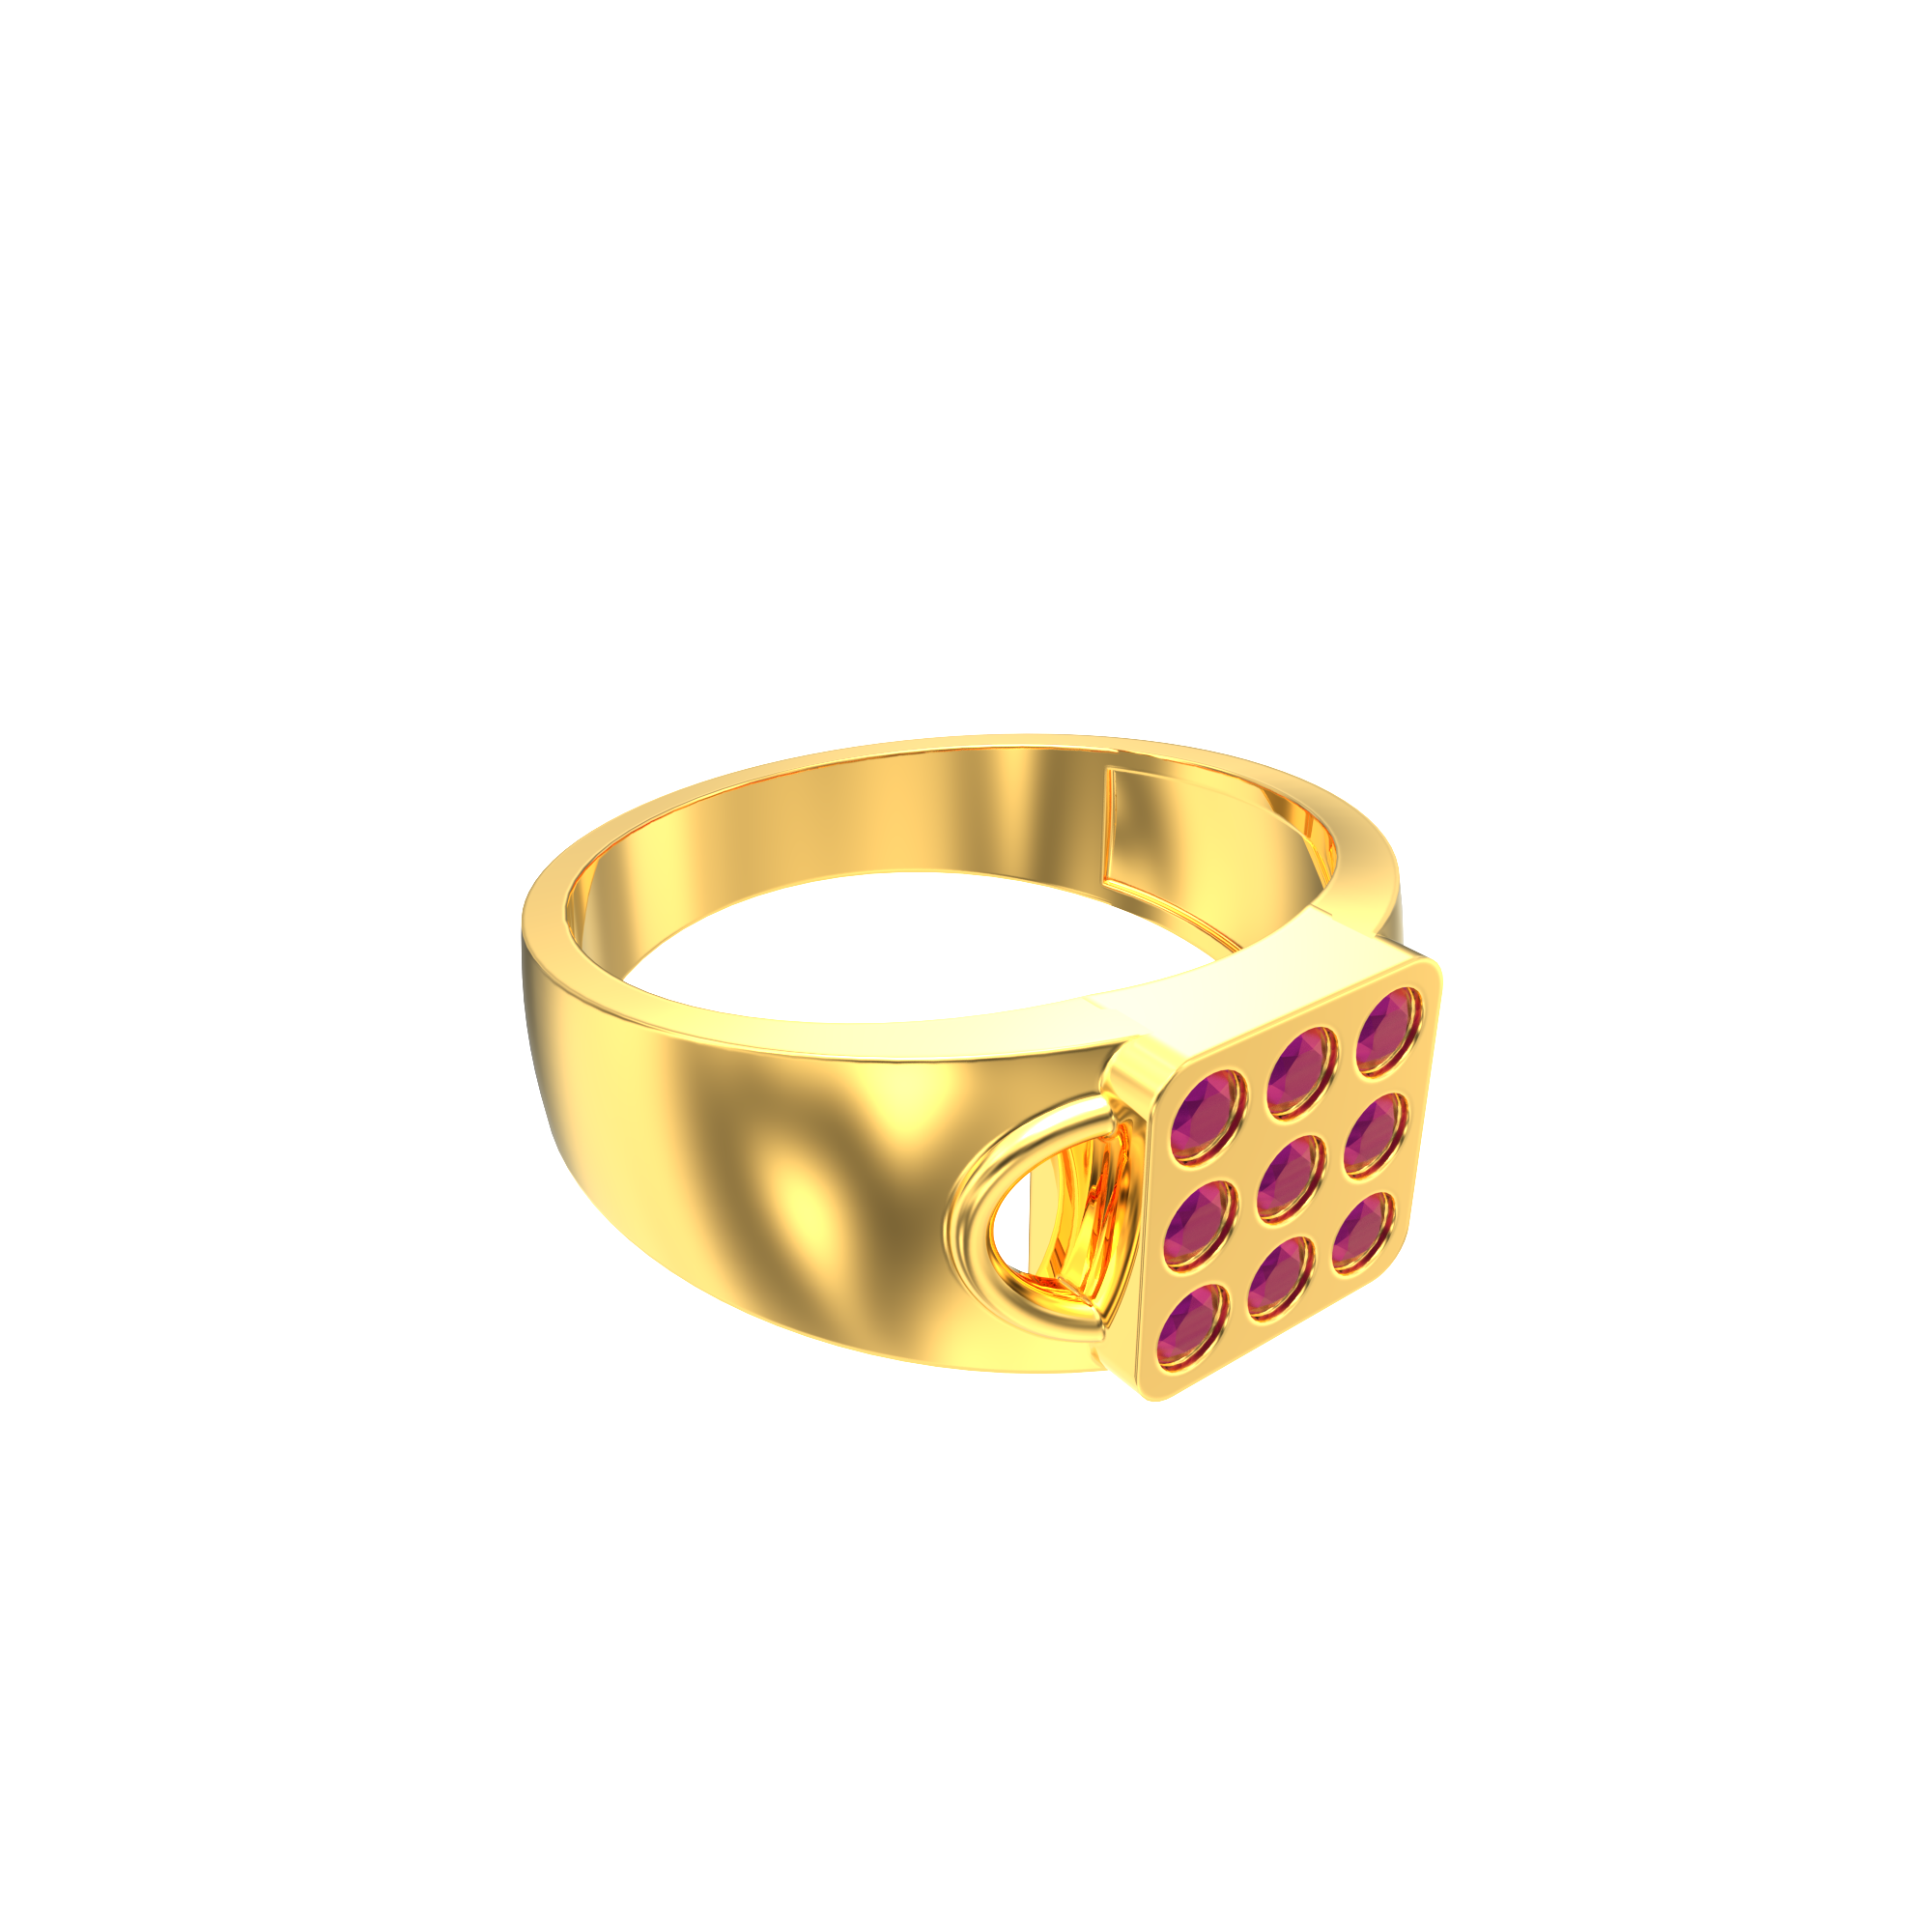 Ring-Manufacturing-company-in-Chennai